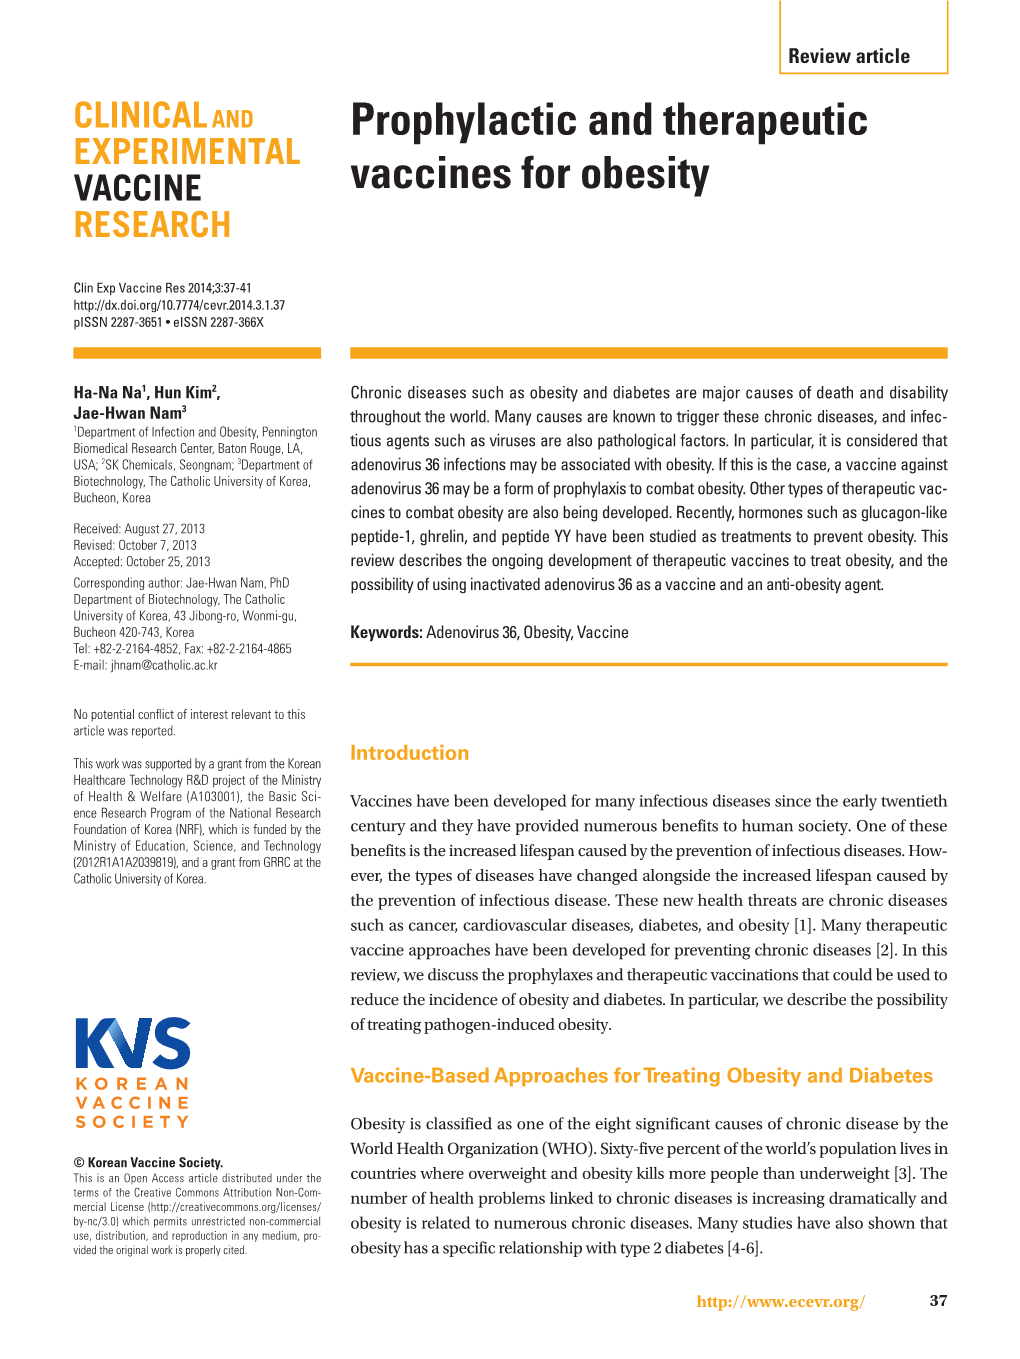 Prophylactic and Therapeutic Vaccines for Obesity